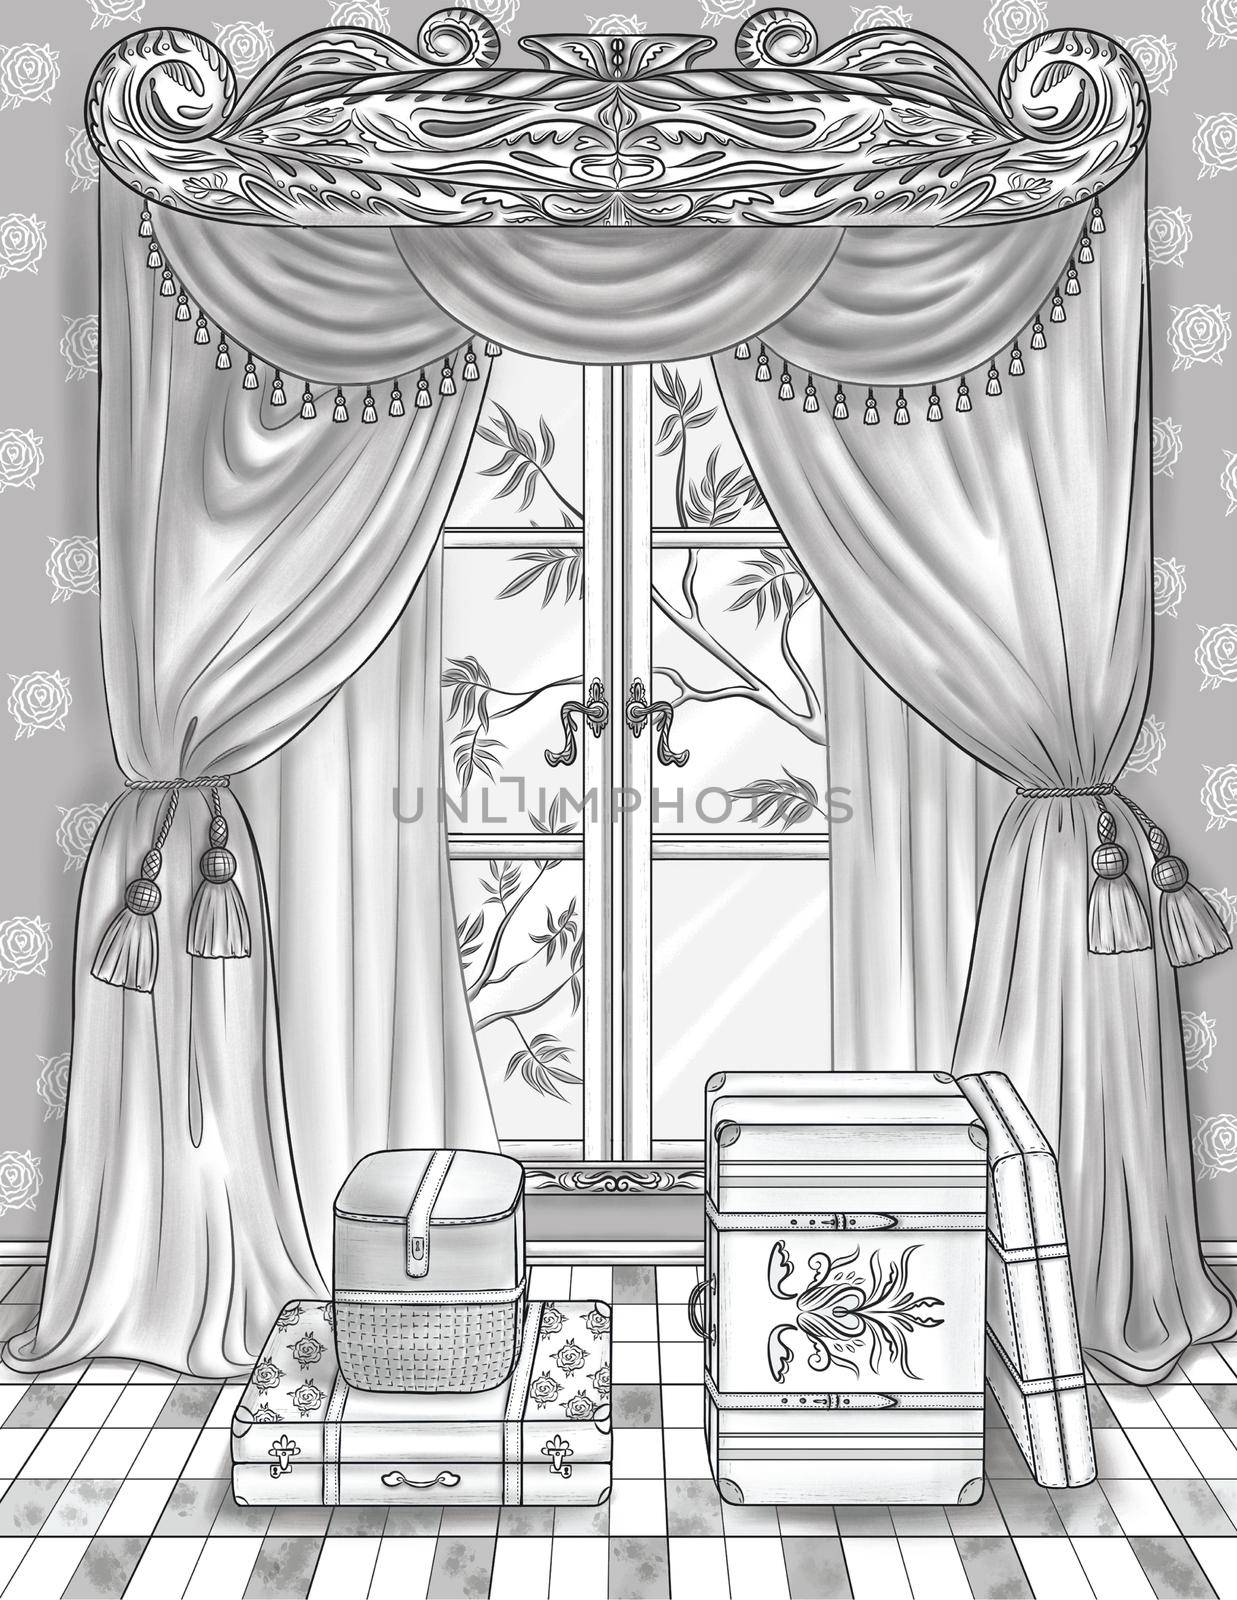 Large Glass Window With Beautiful Curtains Multiple Luggage Bags Colorless Line Drawing. Big Glass Framework With Pane And Drapes Surrounded By Suit Cases Coloring Book Page. by nialowwa